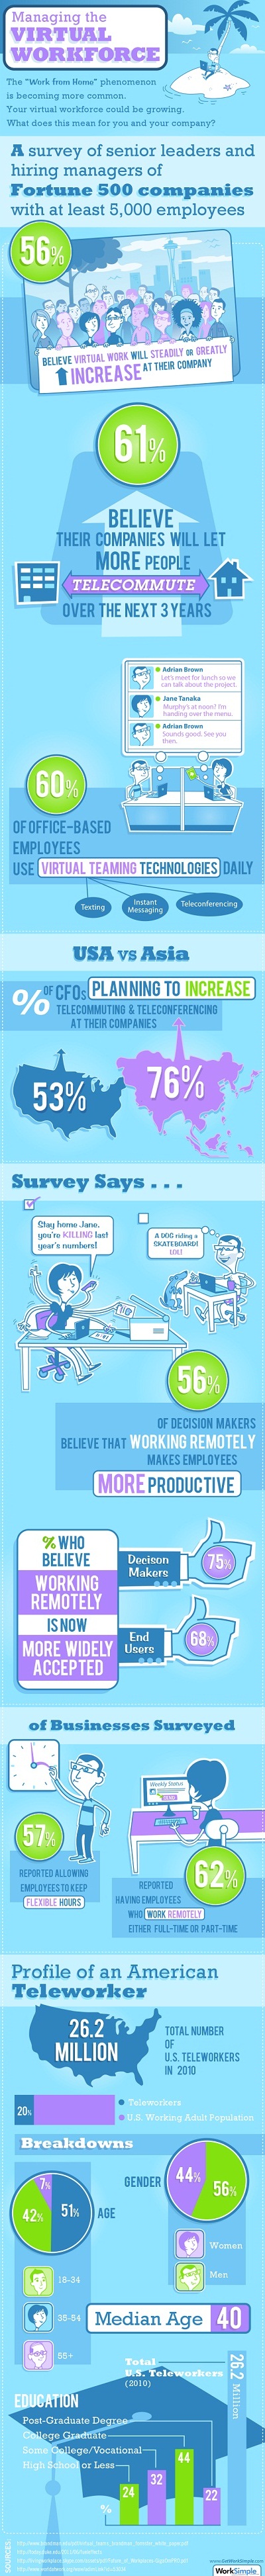 Virtual Workforce and Work From Home Infographic